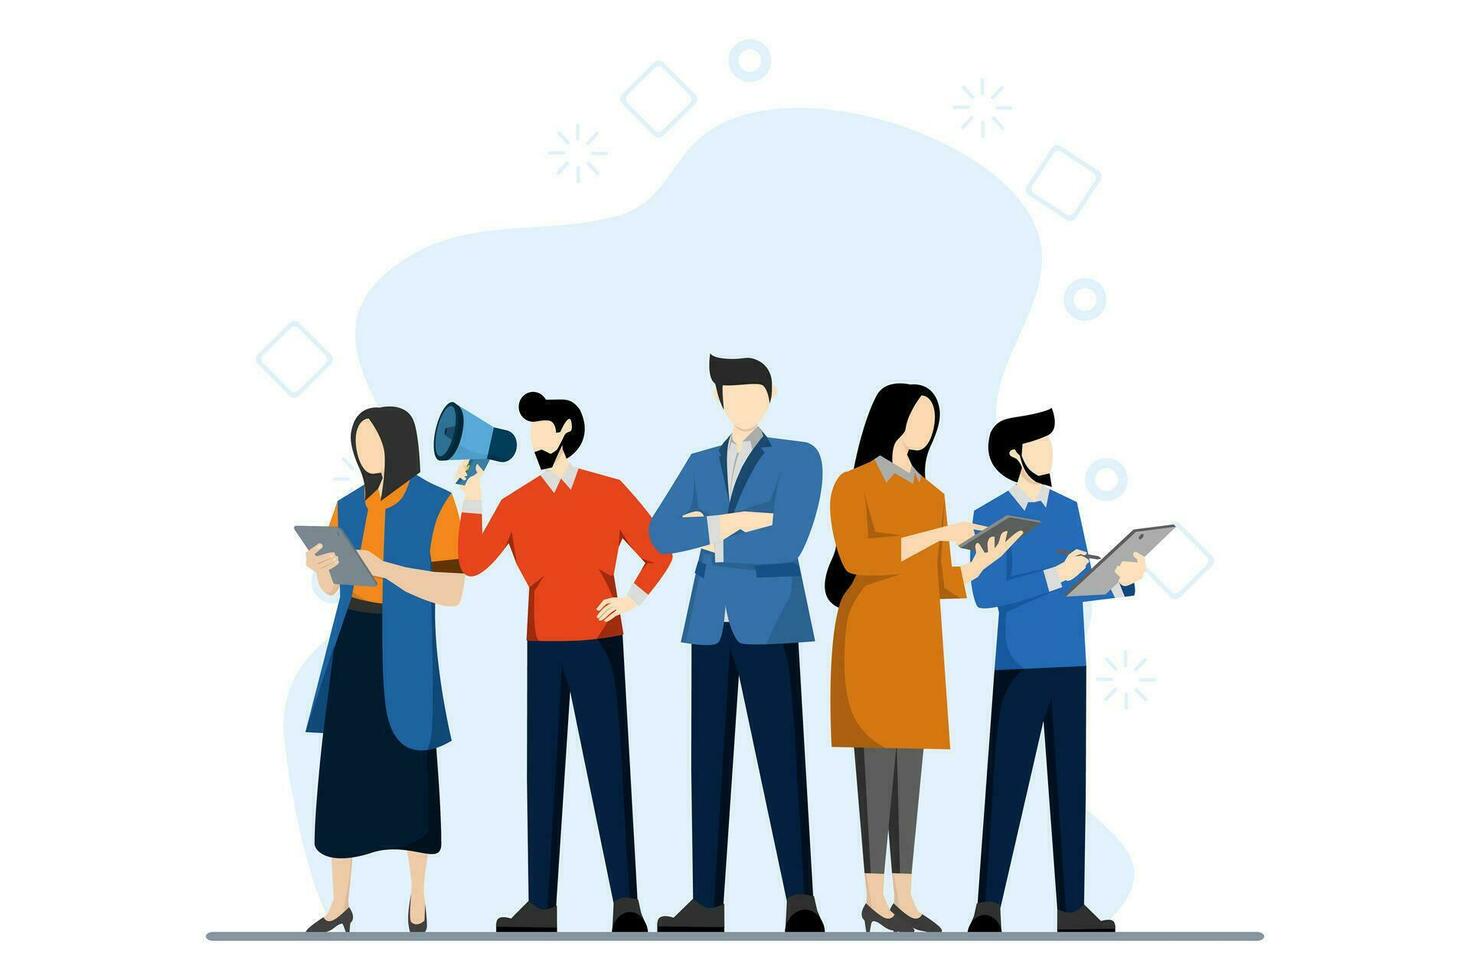 Group of men and women in business suits. Business team ready to work. Team work. Coworker character communication. Building teams and business partnerships. Office worker standing vector